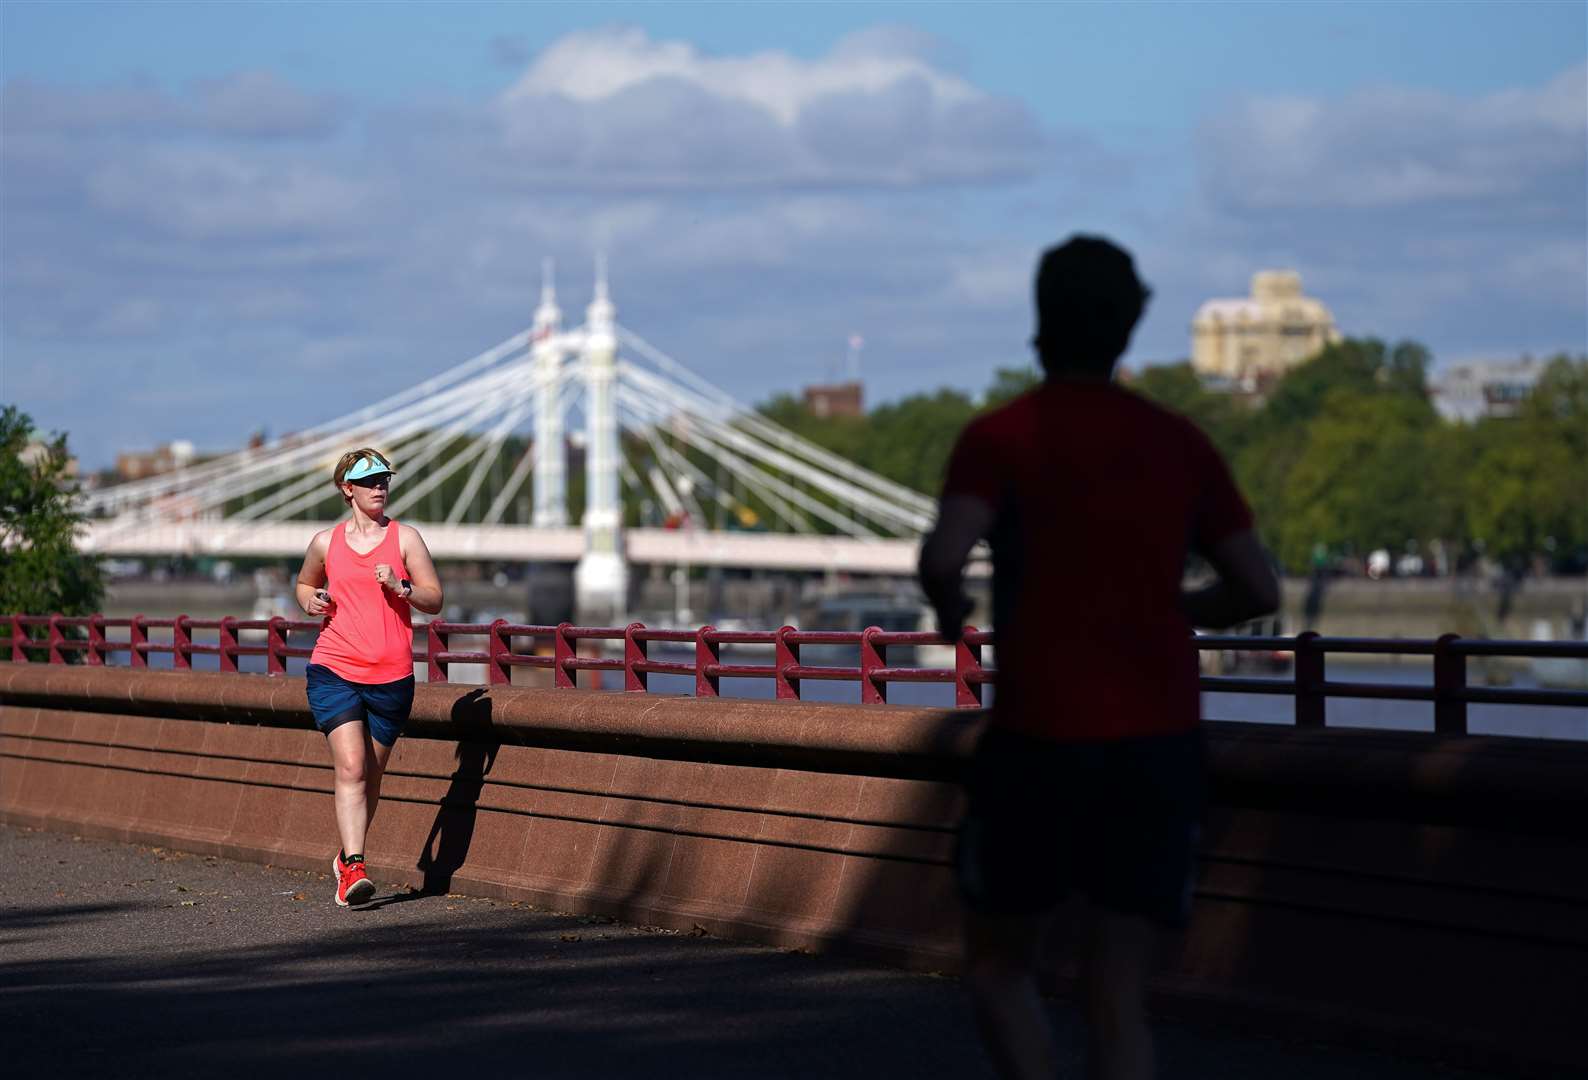 Runners in Battersea Park exercise next to the Thames in London (John Walton/:A)